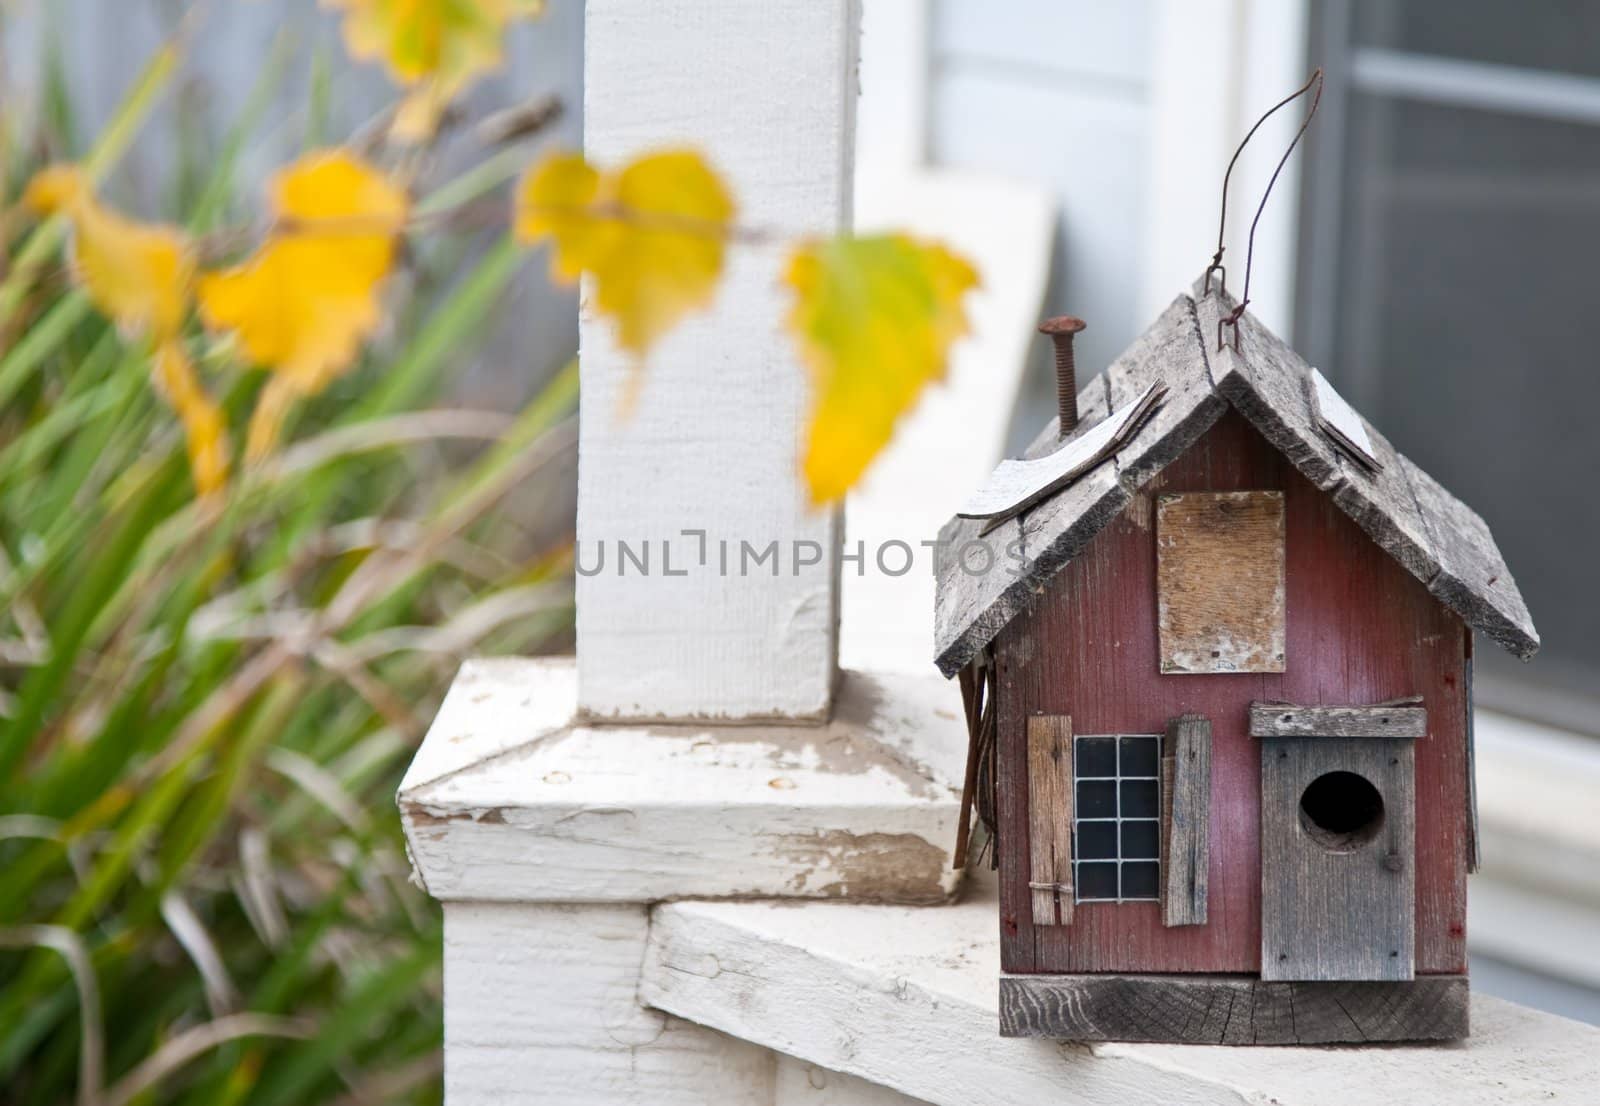 Birdhouse by timscottrom